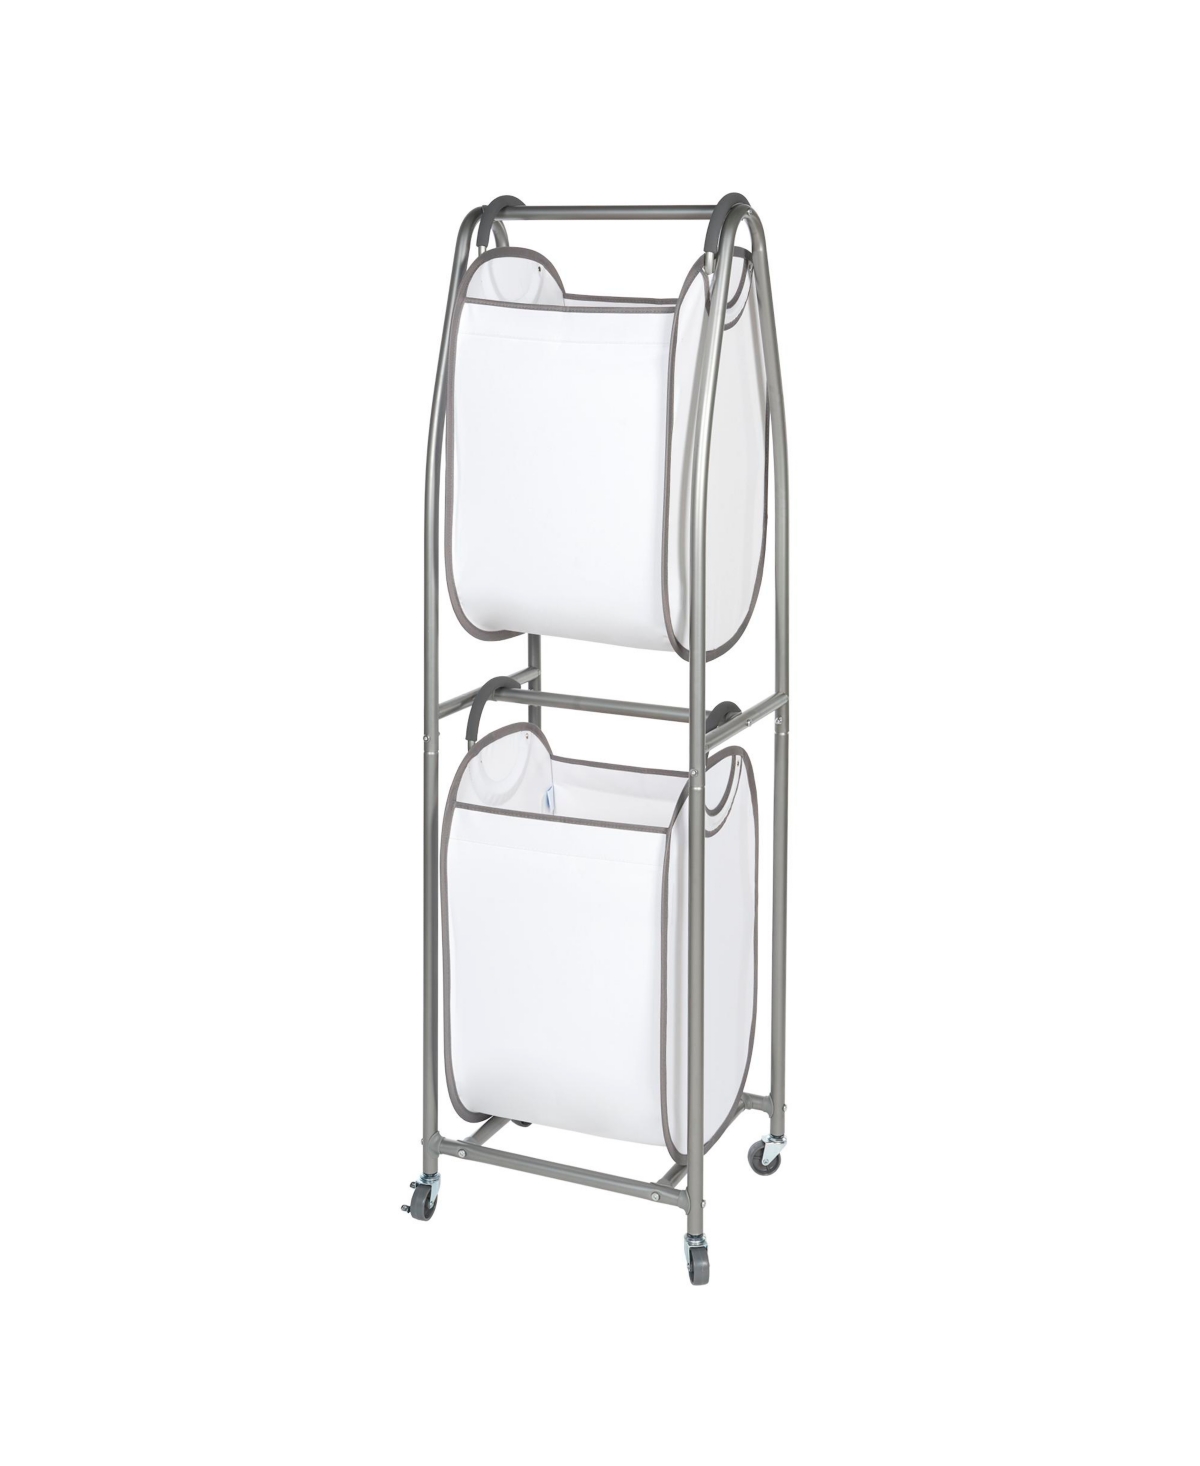 2-Tier Rolling Vertical Laundry Sorter - Monstera Leaf Charcoal